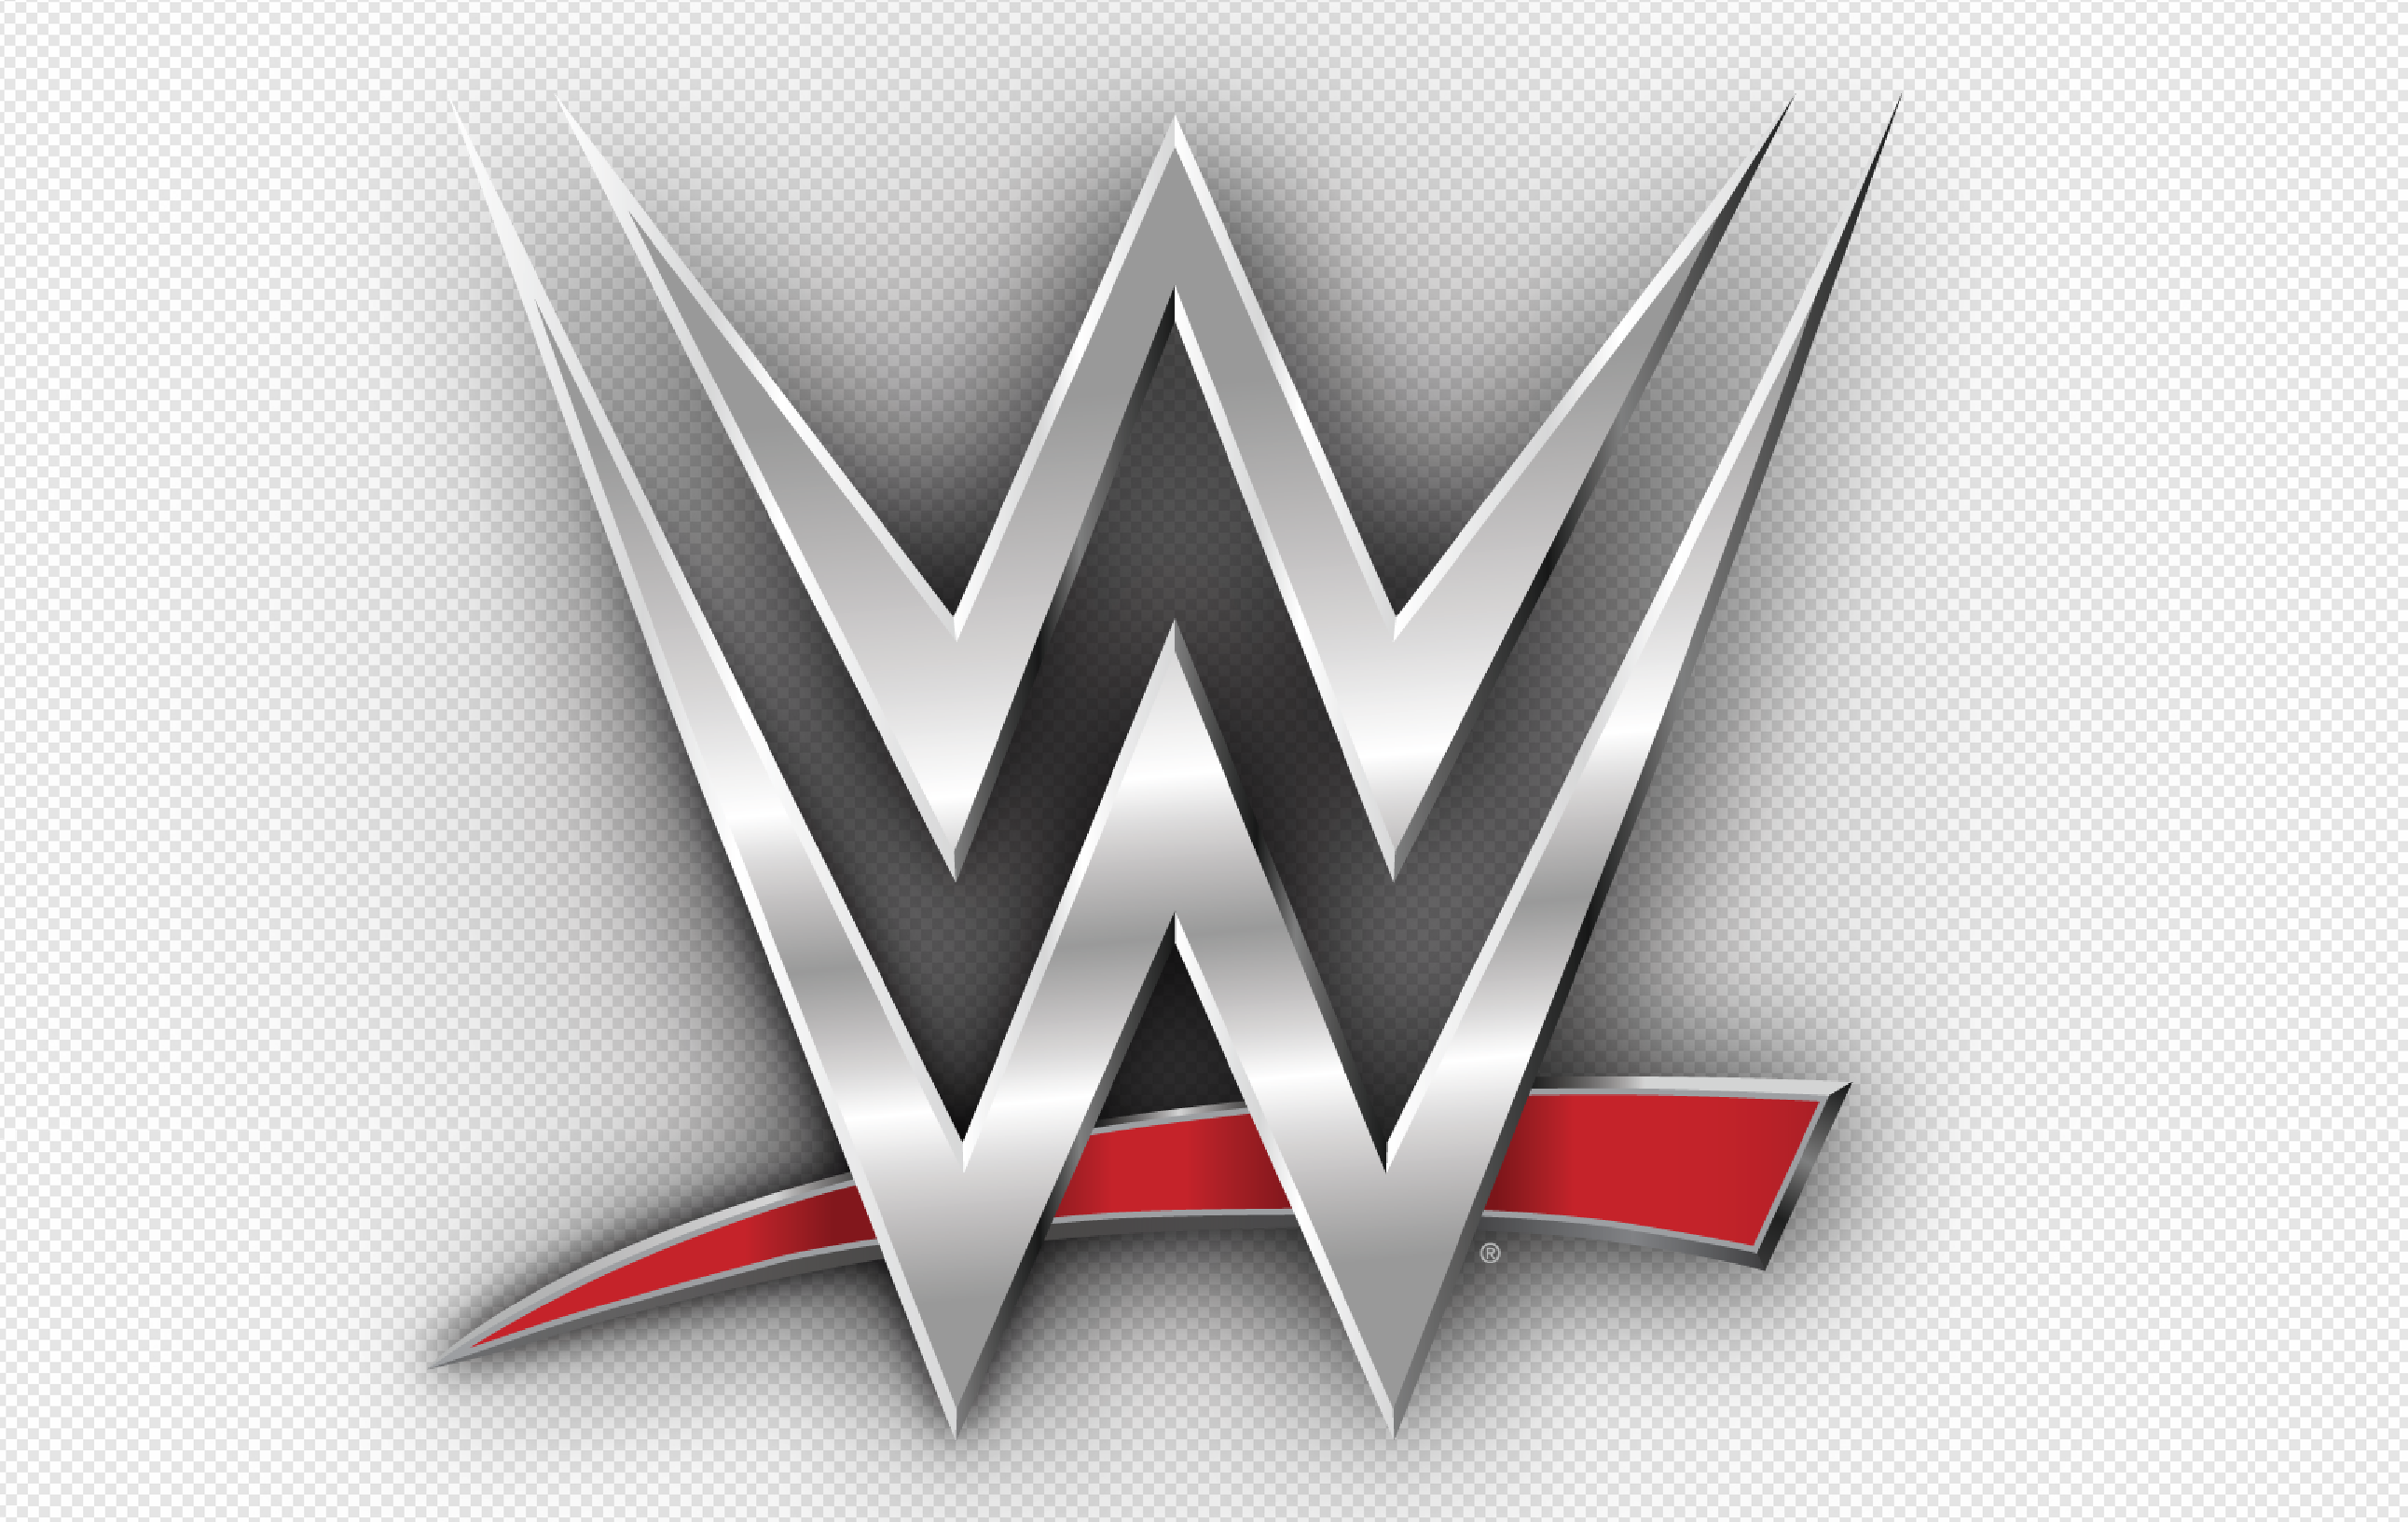 The red line behind the WWE logo doesn't connect in the back :  r/mildlyinfuriating